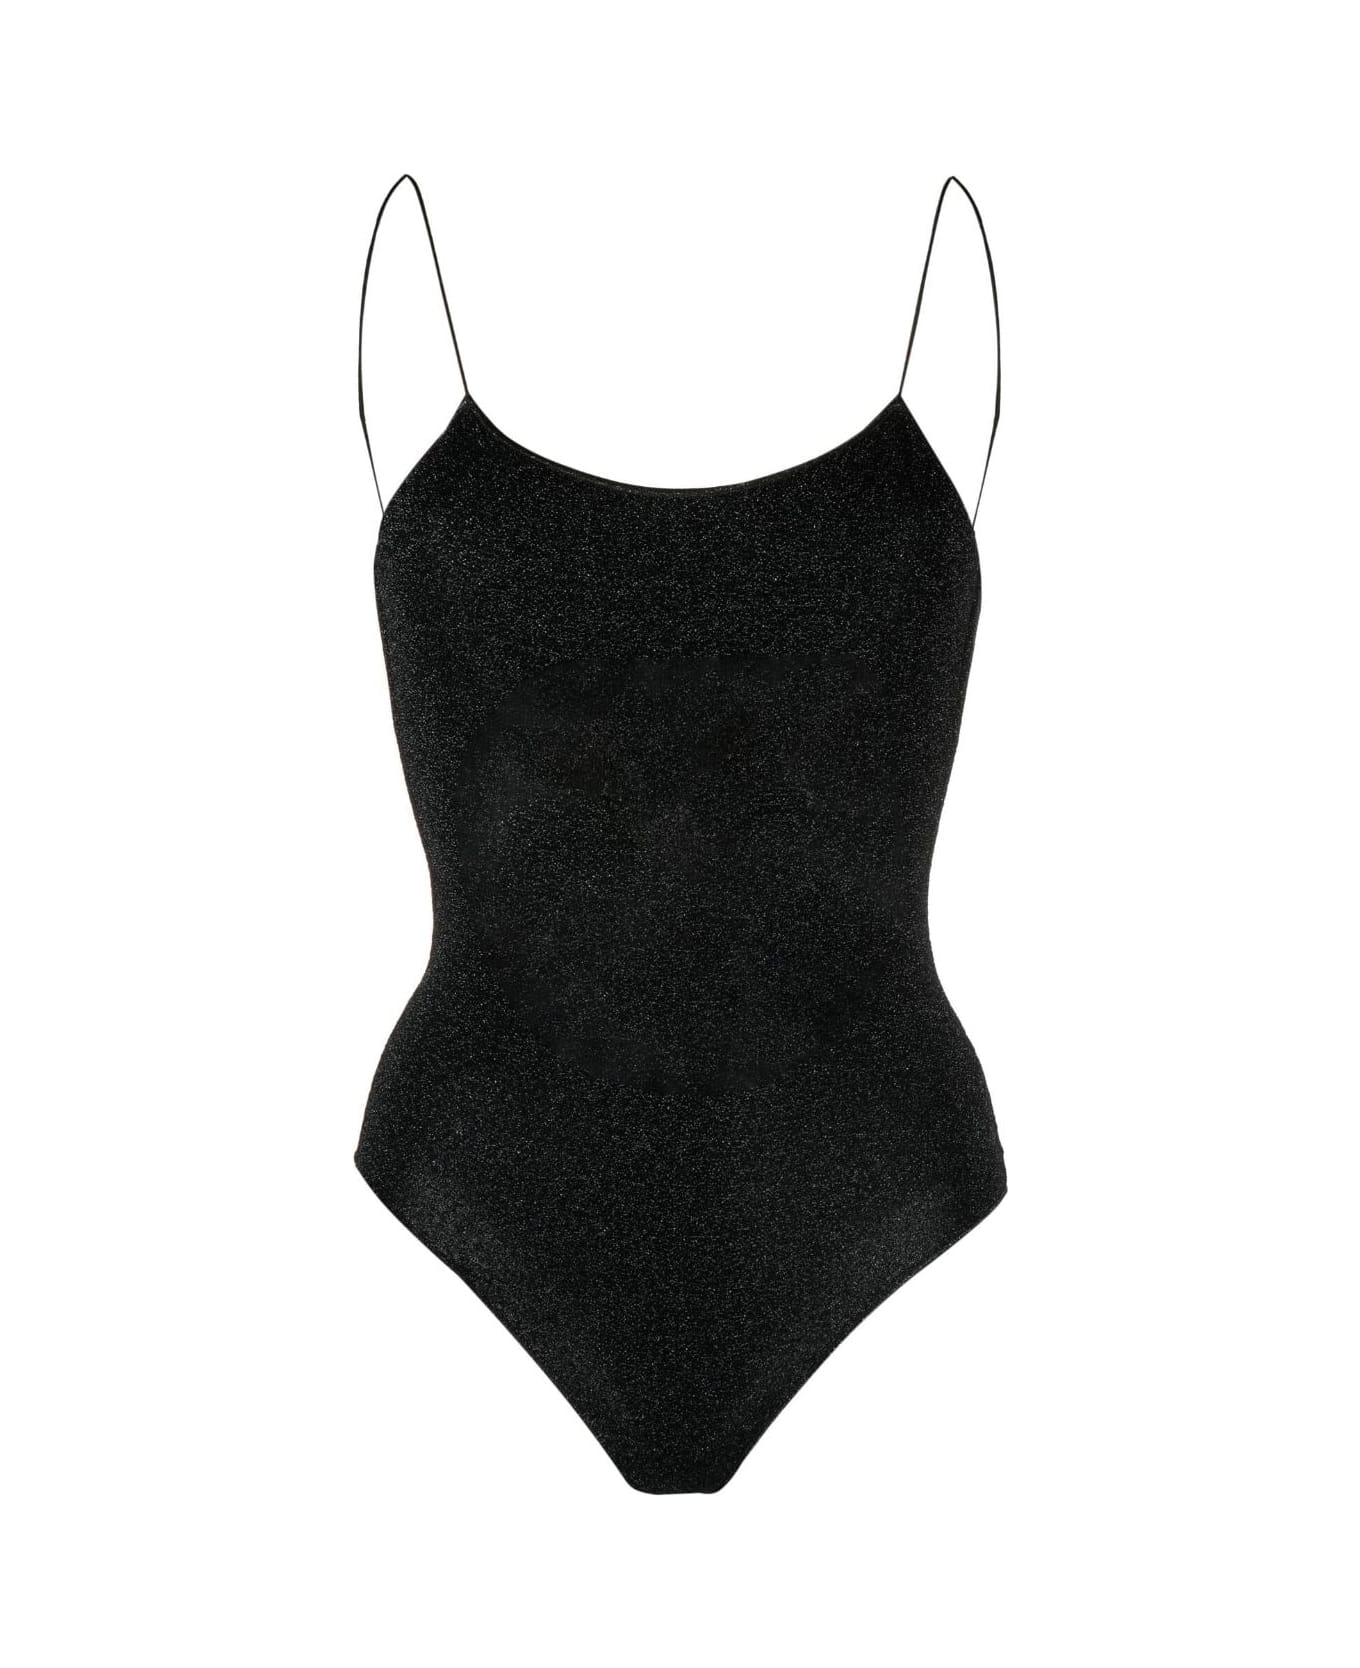 Oseree Black Lumiere Maillot One-piece Swimsuit - Black